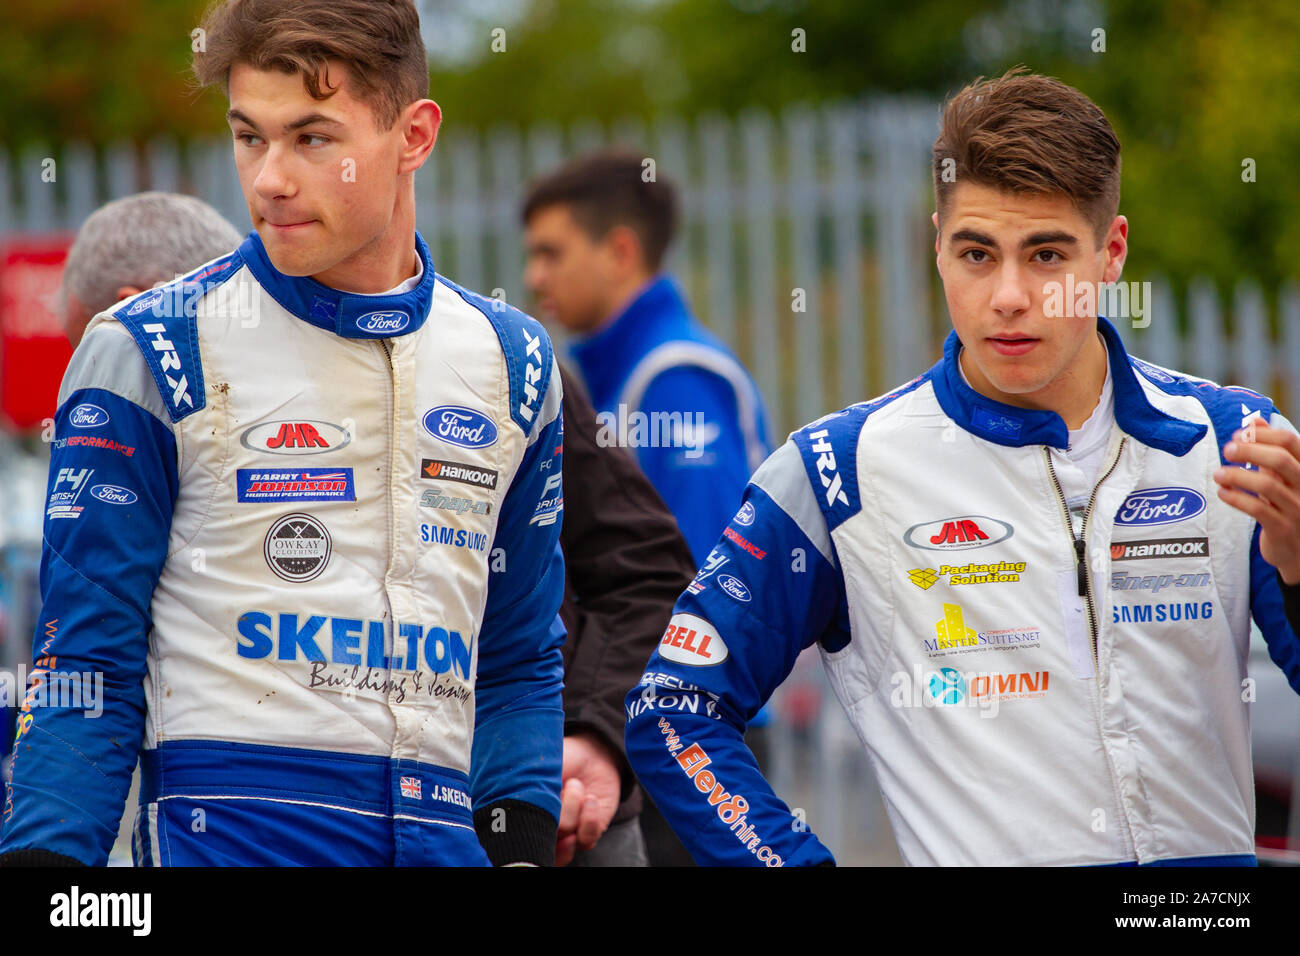 Josh Skelton and Carter Williams in the paddock after qualifying. British Formula 4. Last race weekend of the season. Brands Hatch, 12 Oct 12 2019 Stock Photo